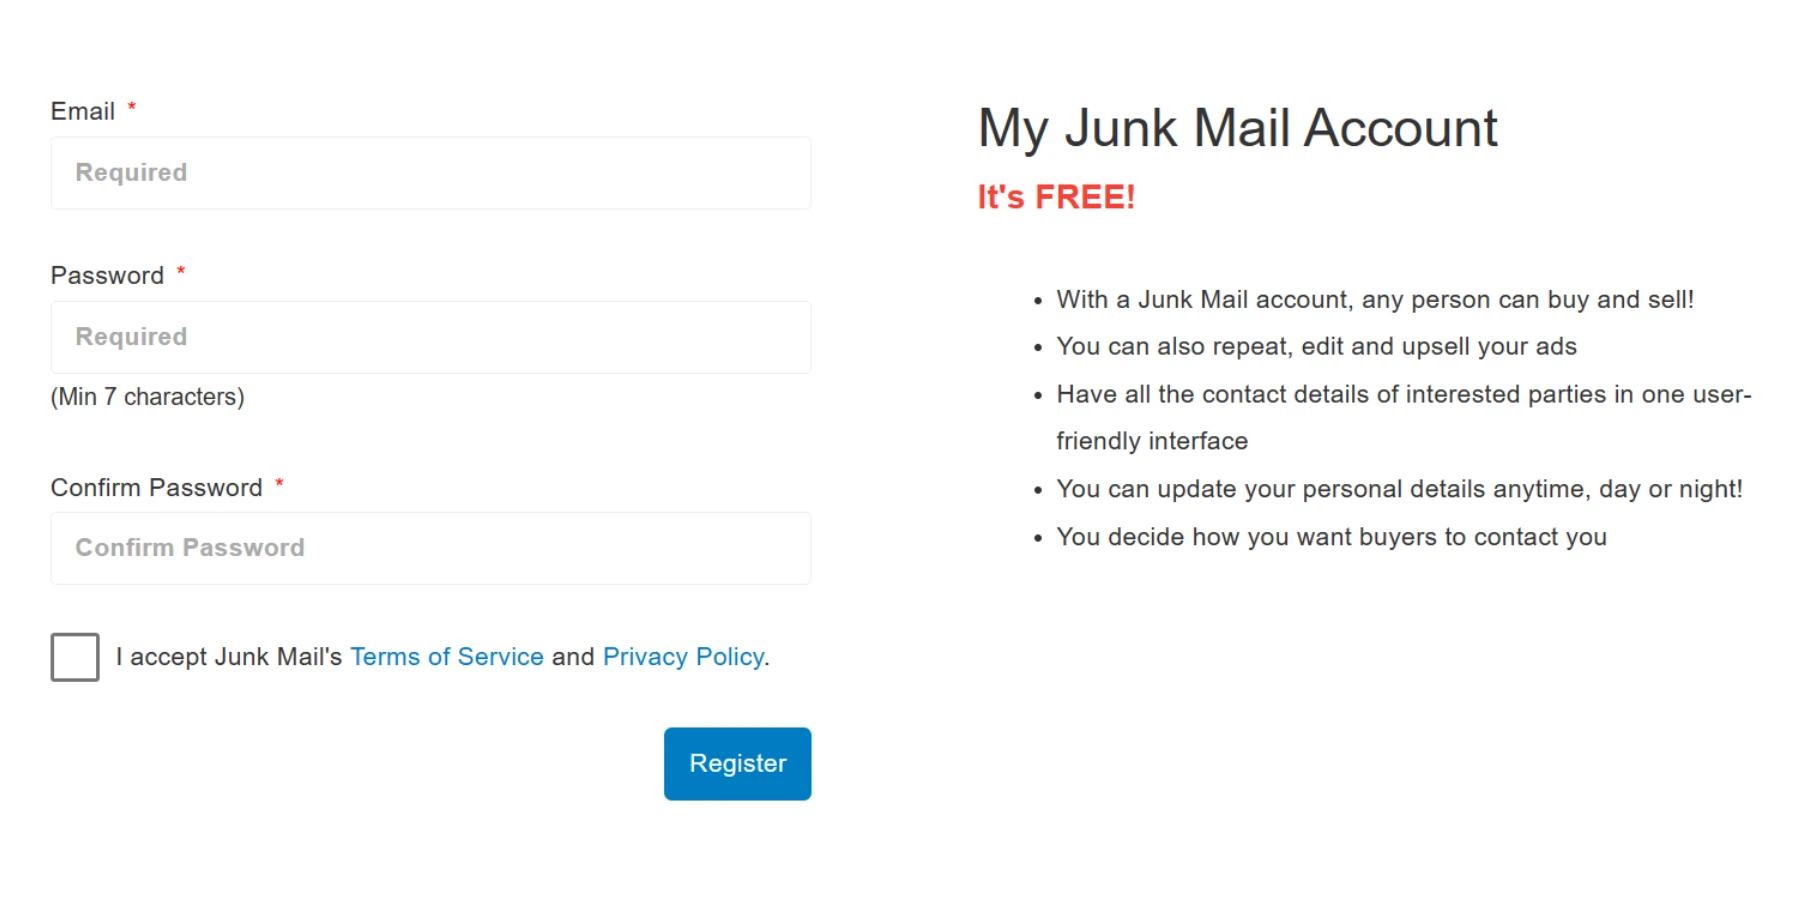 Create Account to Sell Furniture on Junk Mail